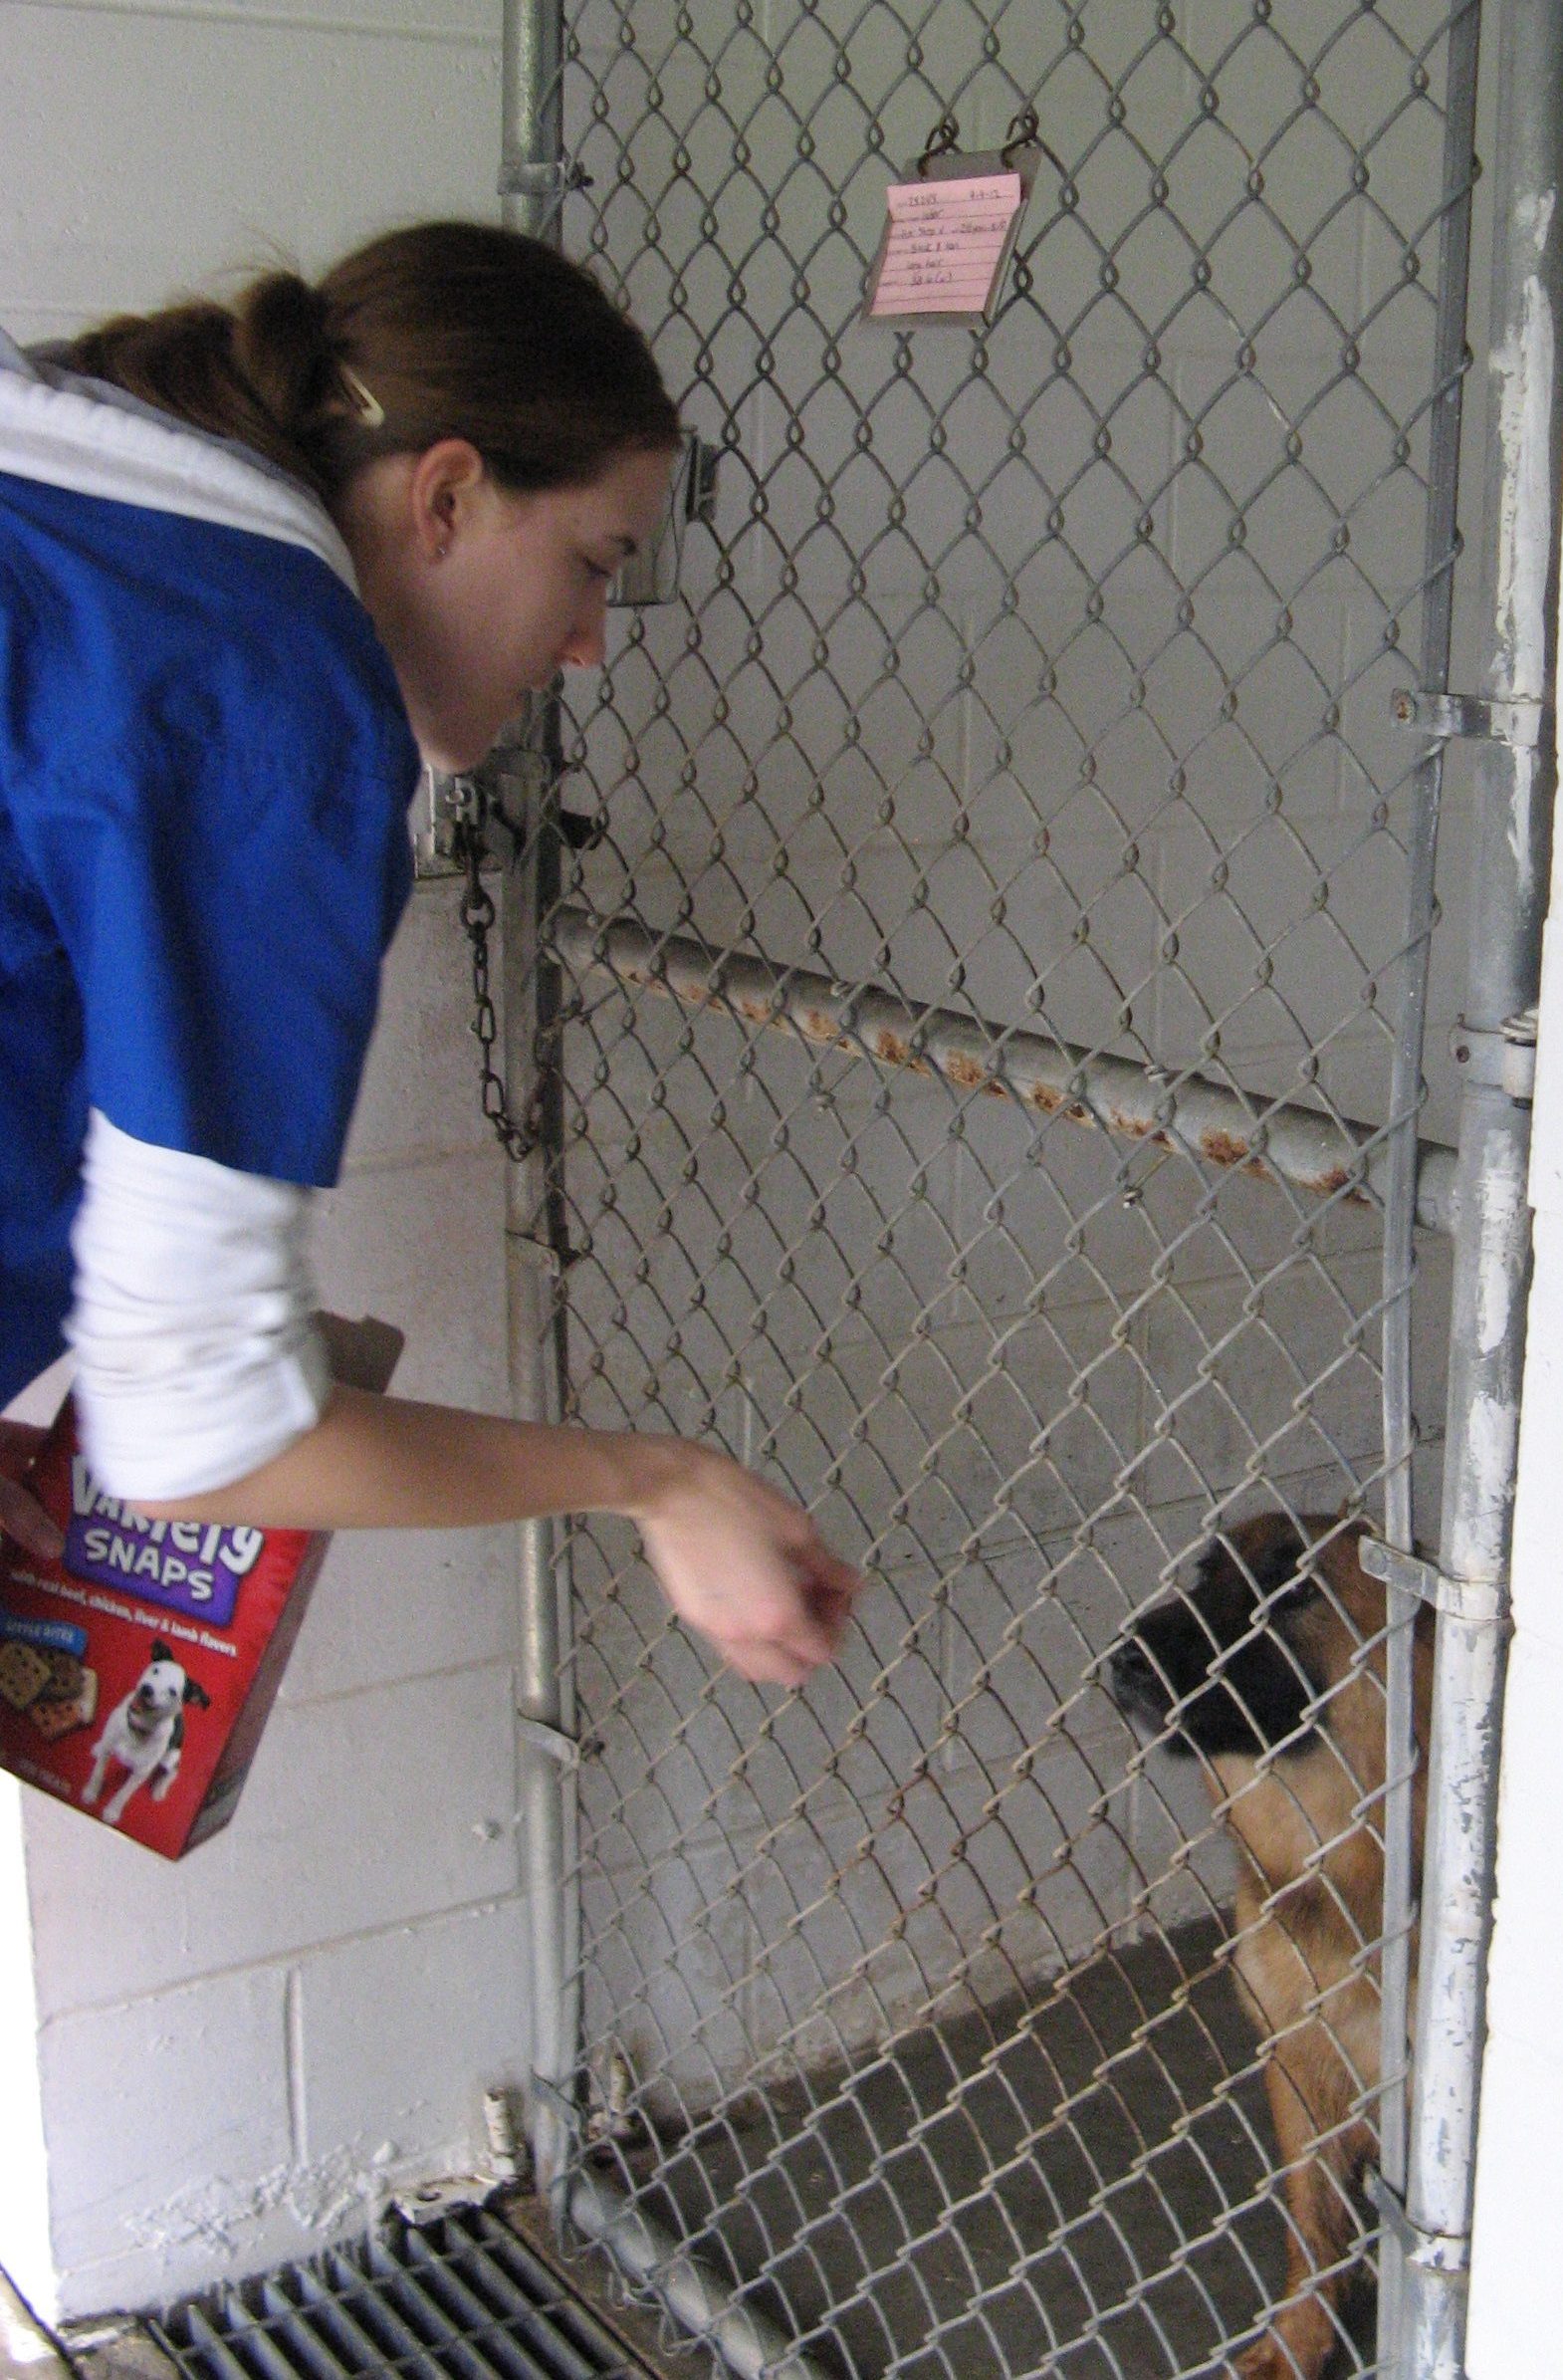 person offer dog a treat through chain link fence at front of run